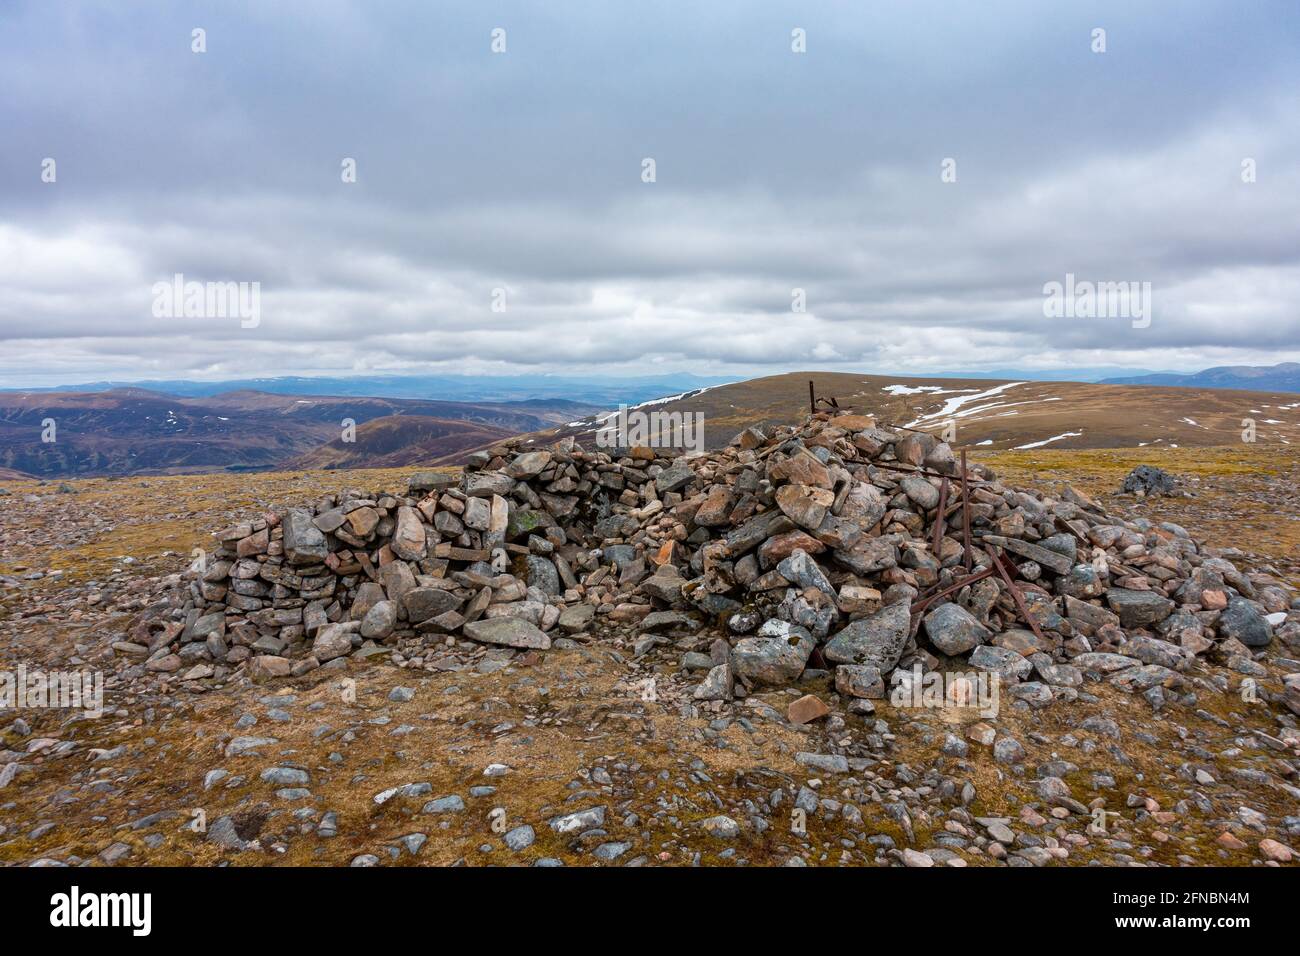 The summit cairn of the Munro mountain of Beinn Udlamain on the west side of the Drumochter Pass, Scotland Stock Photo